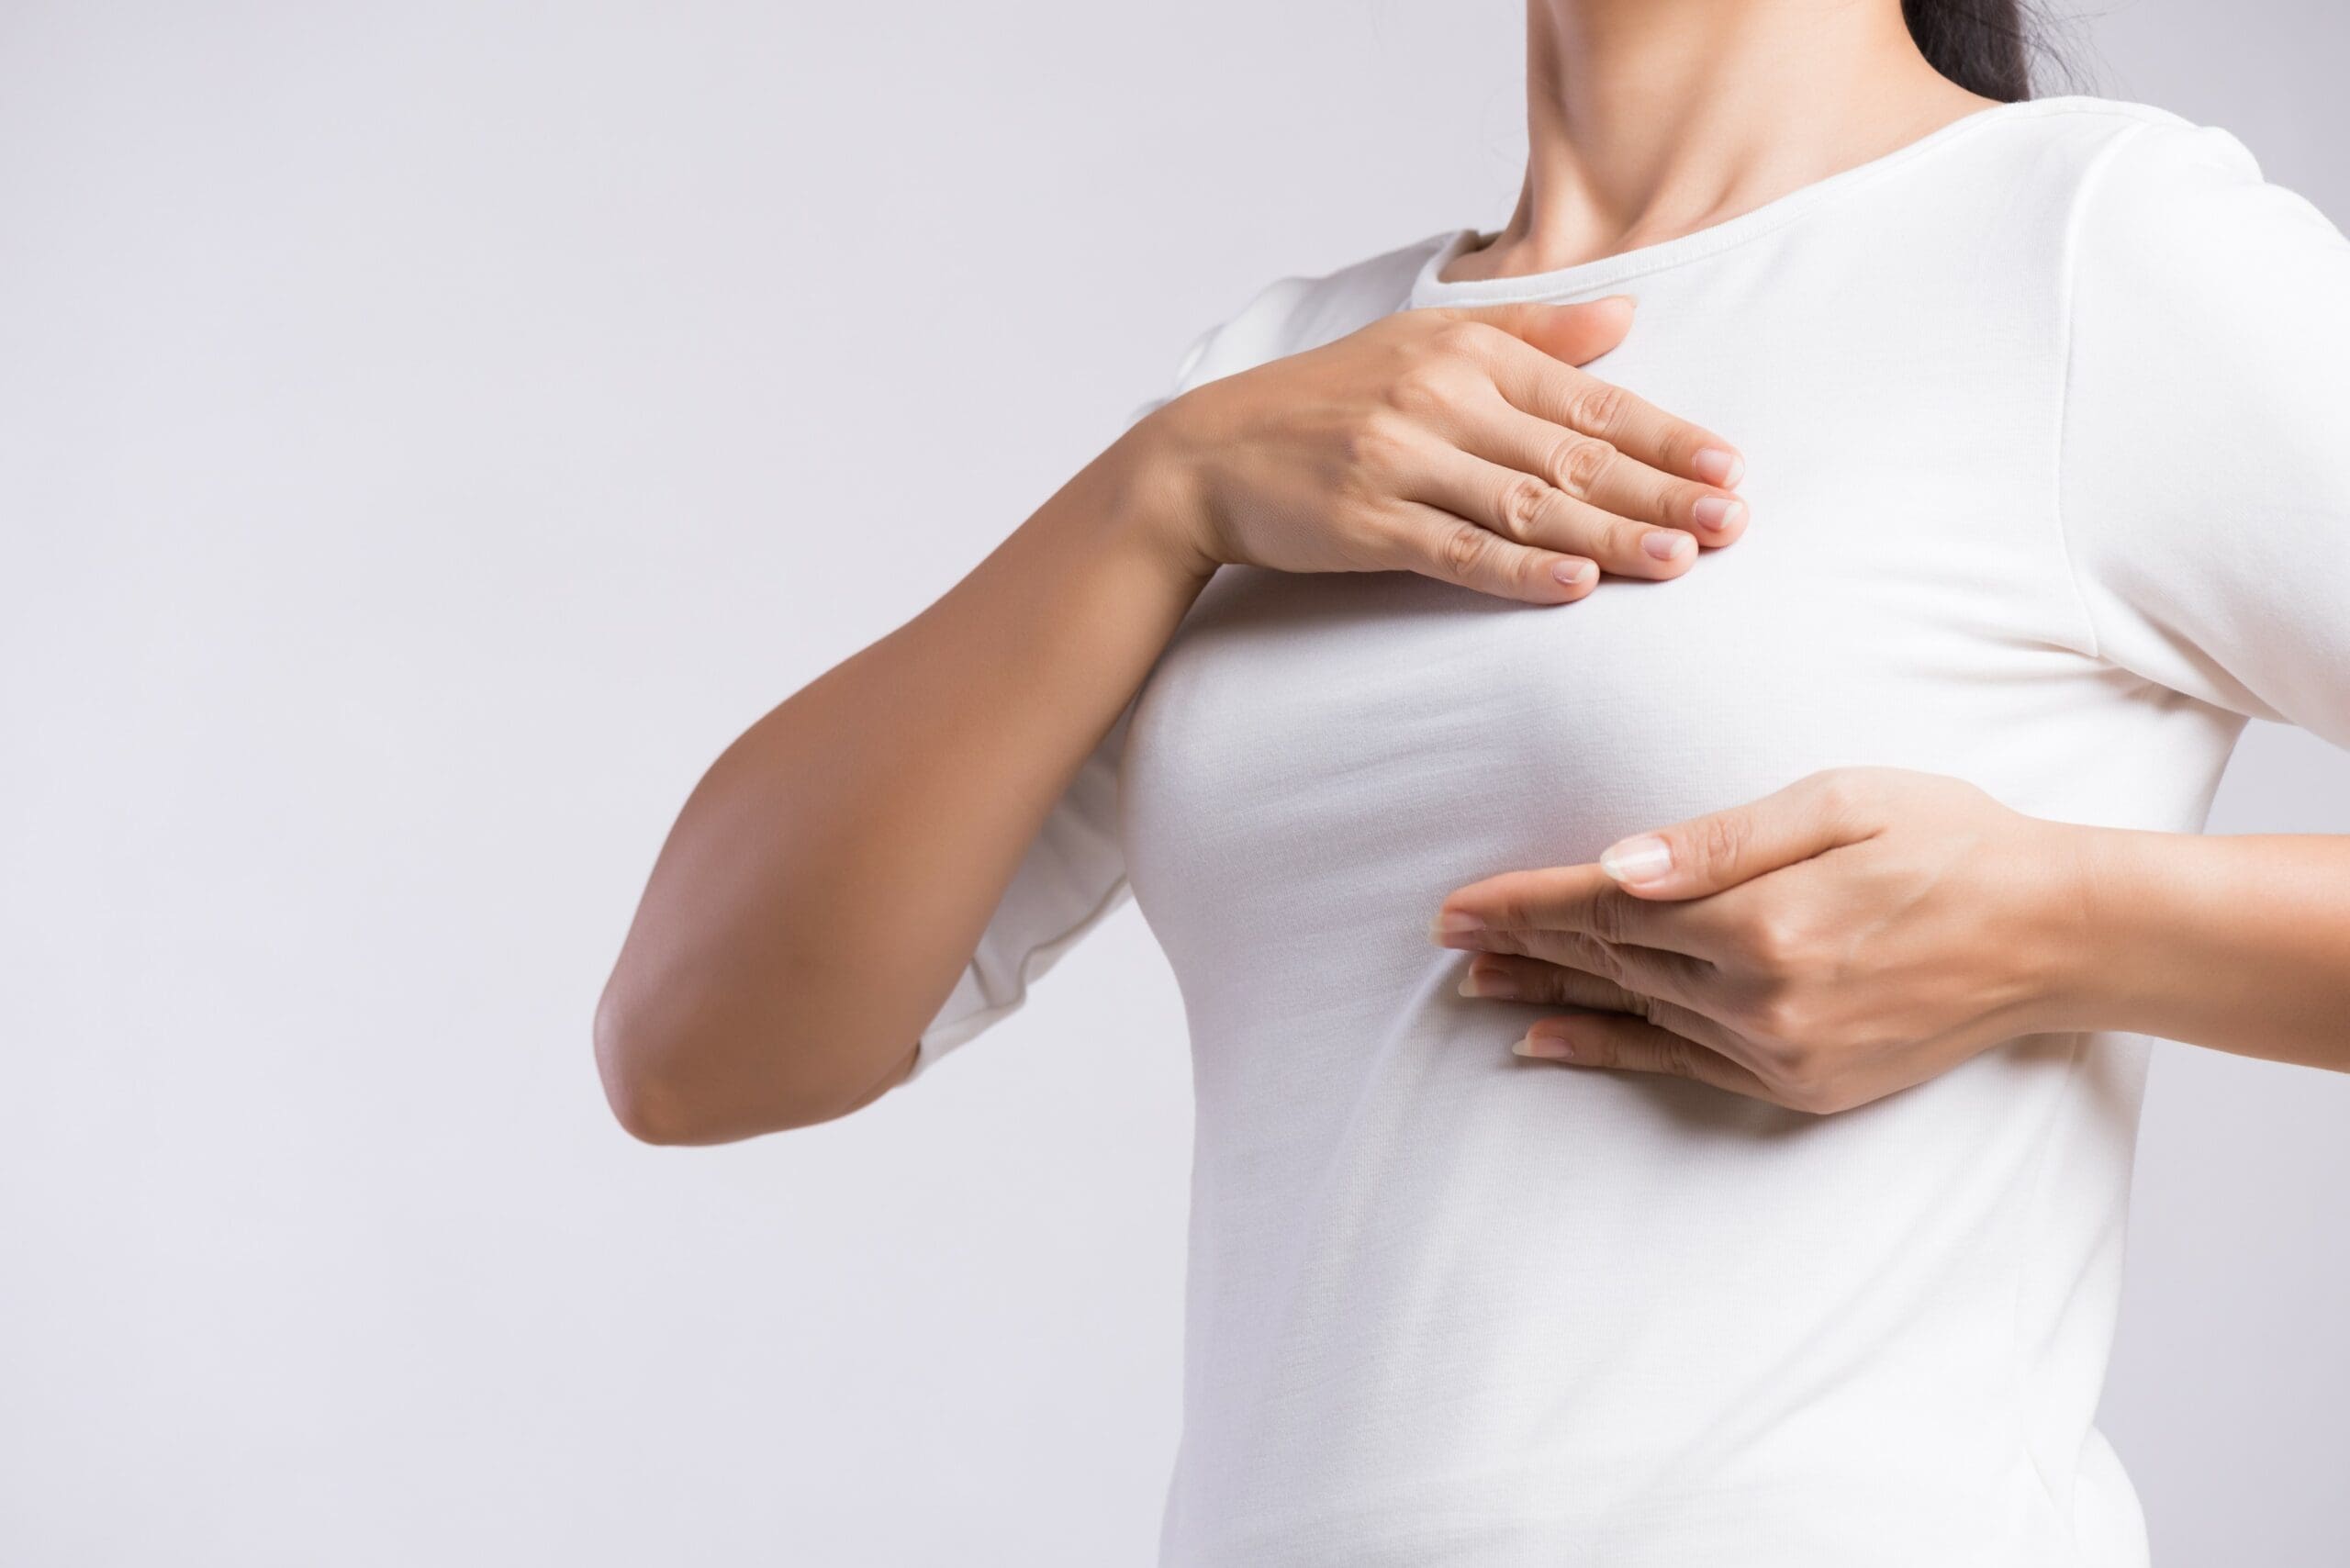 I feel a lump in my breast – what do I do? Dr Michael Boyer